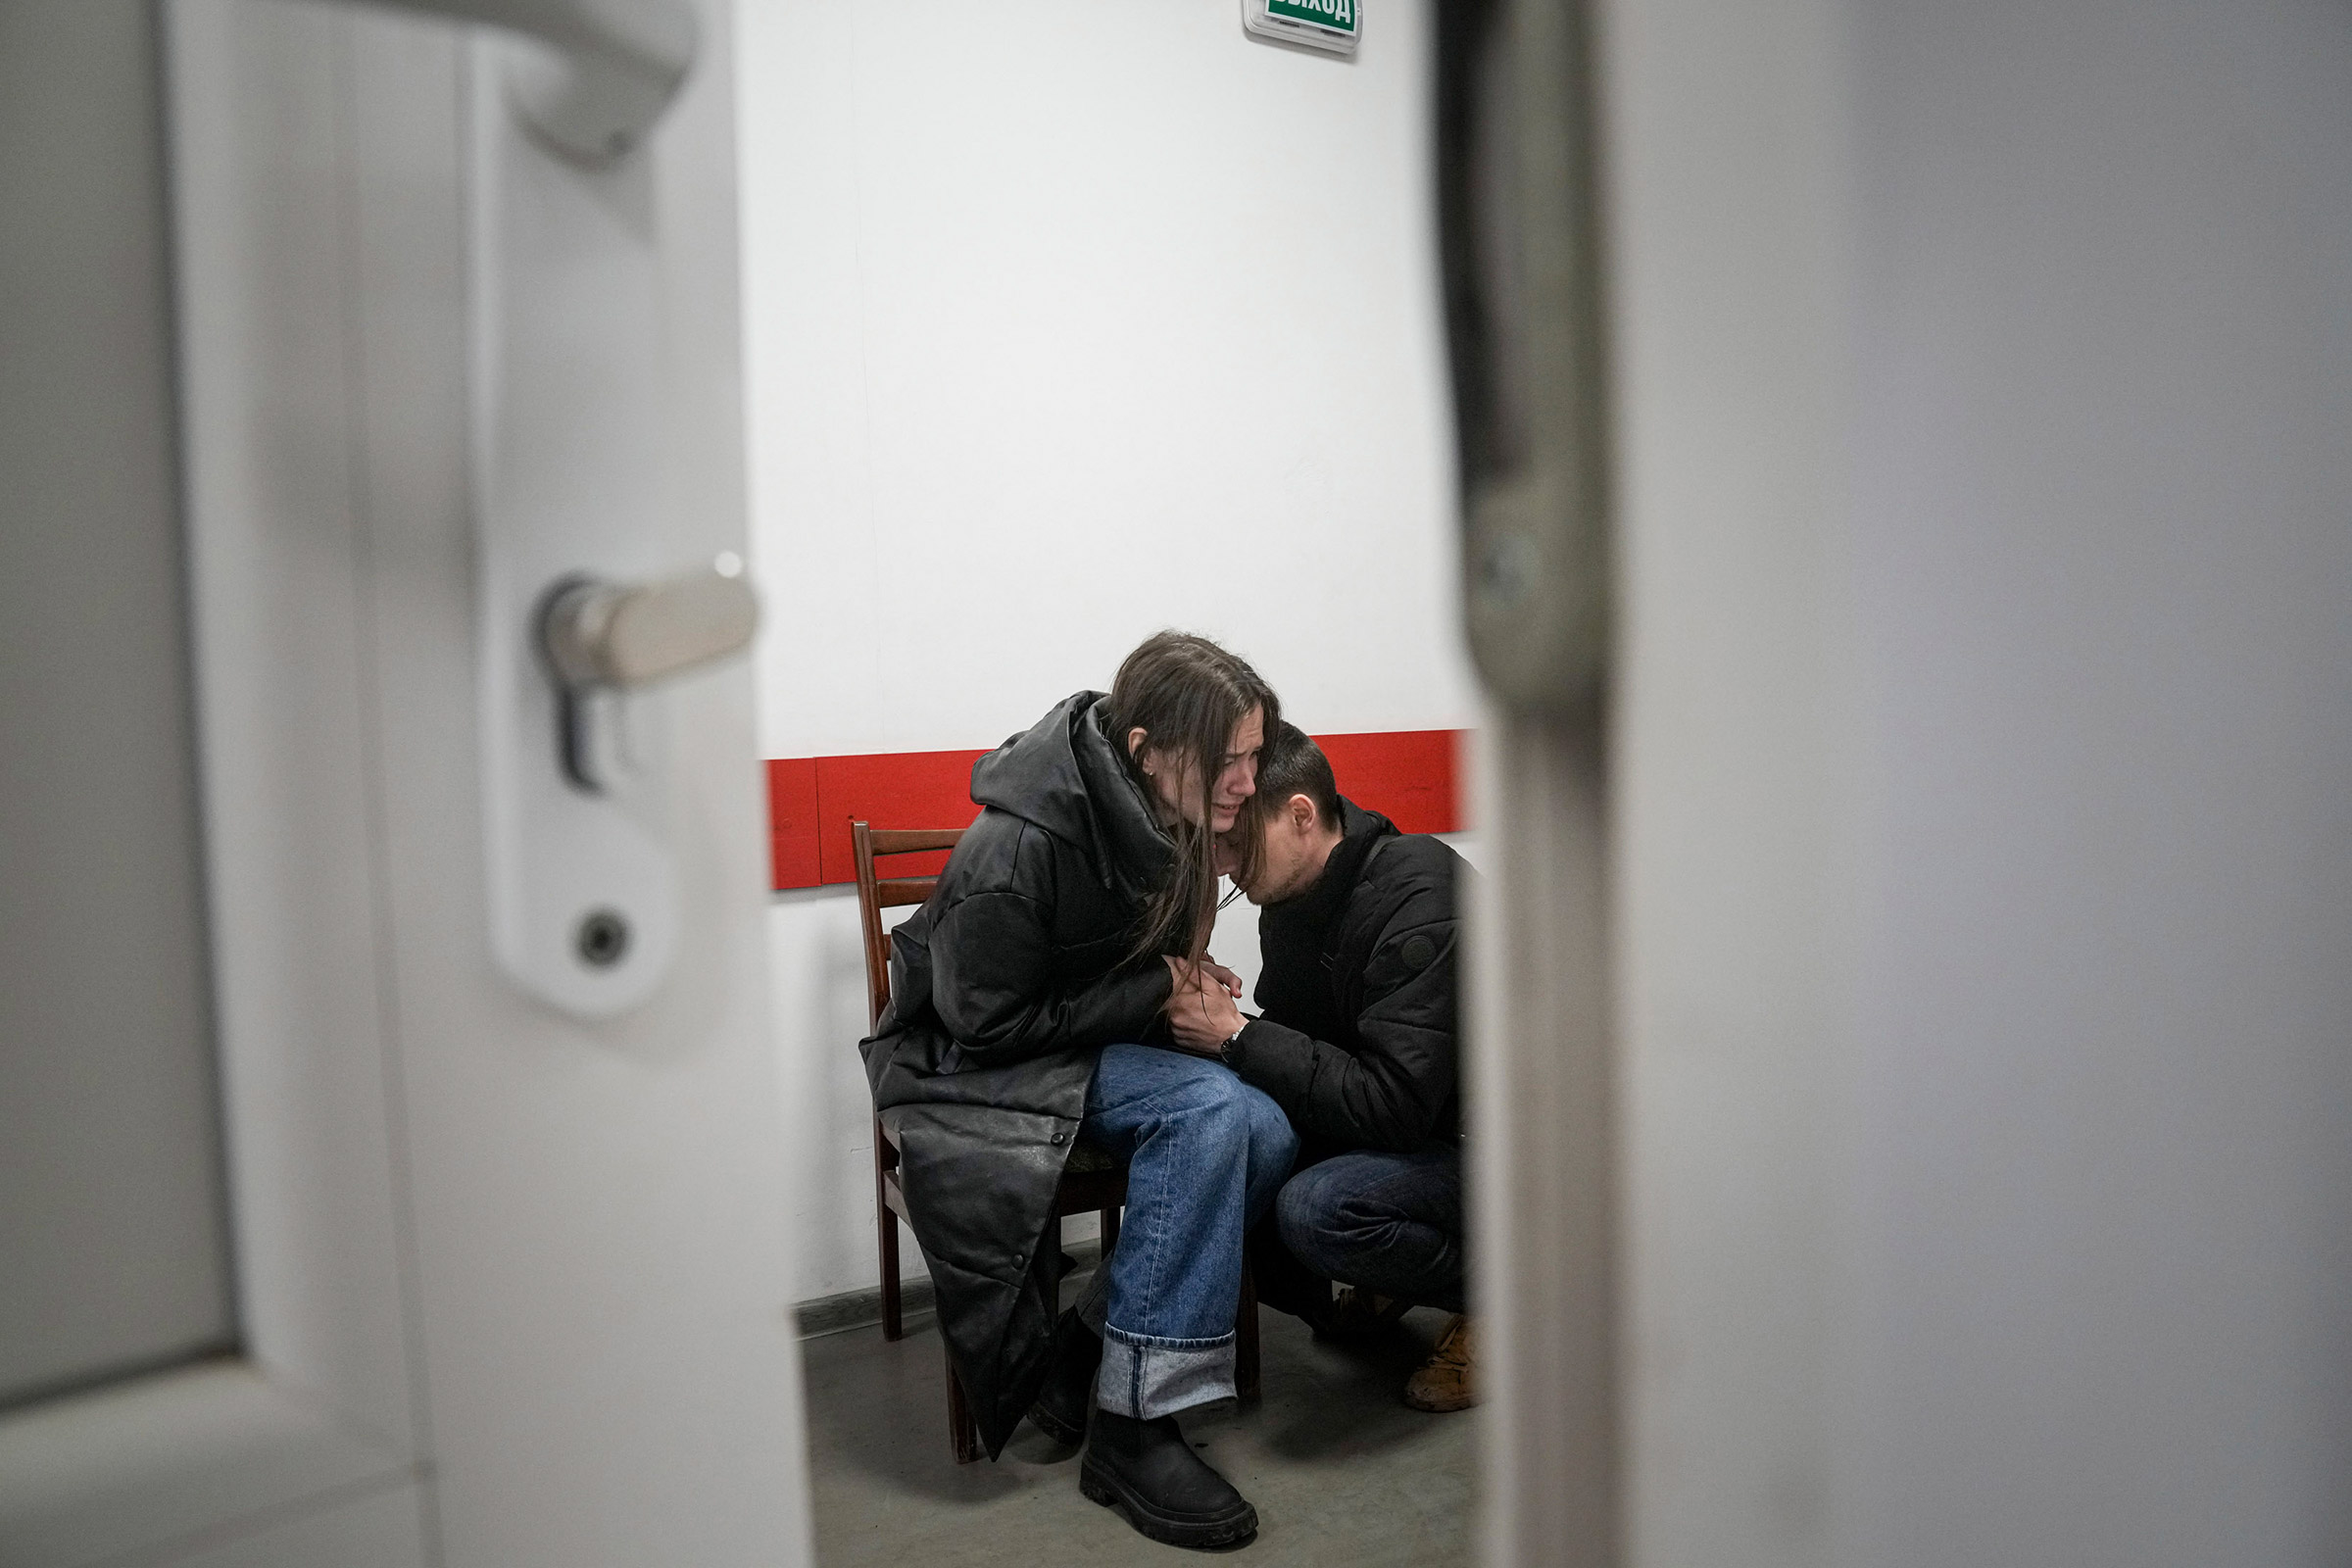 Marina Yatsko and her boyfriend Fedor comfort each other after her 18-month-old son was killed at a hospital in Mariupol, Ukraine, on March 4 (Evgeniy Maloletka—AP)